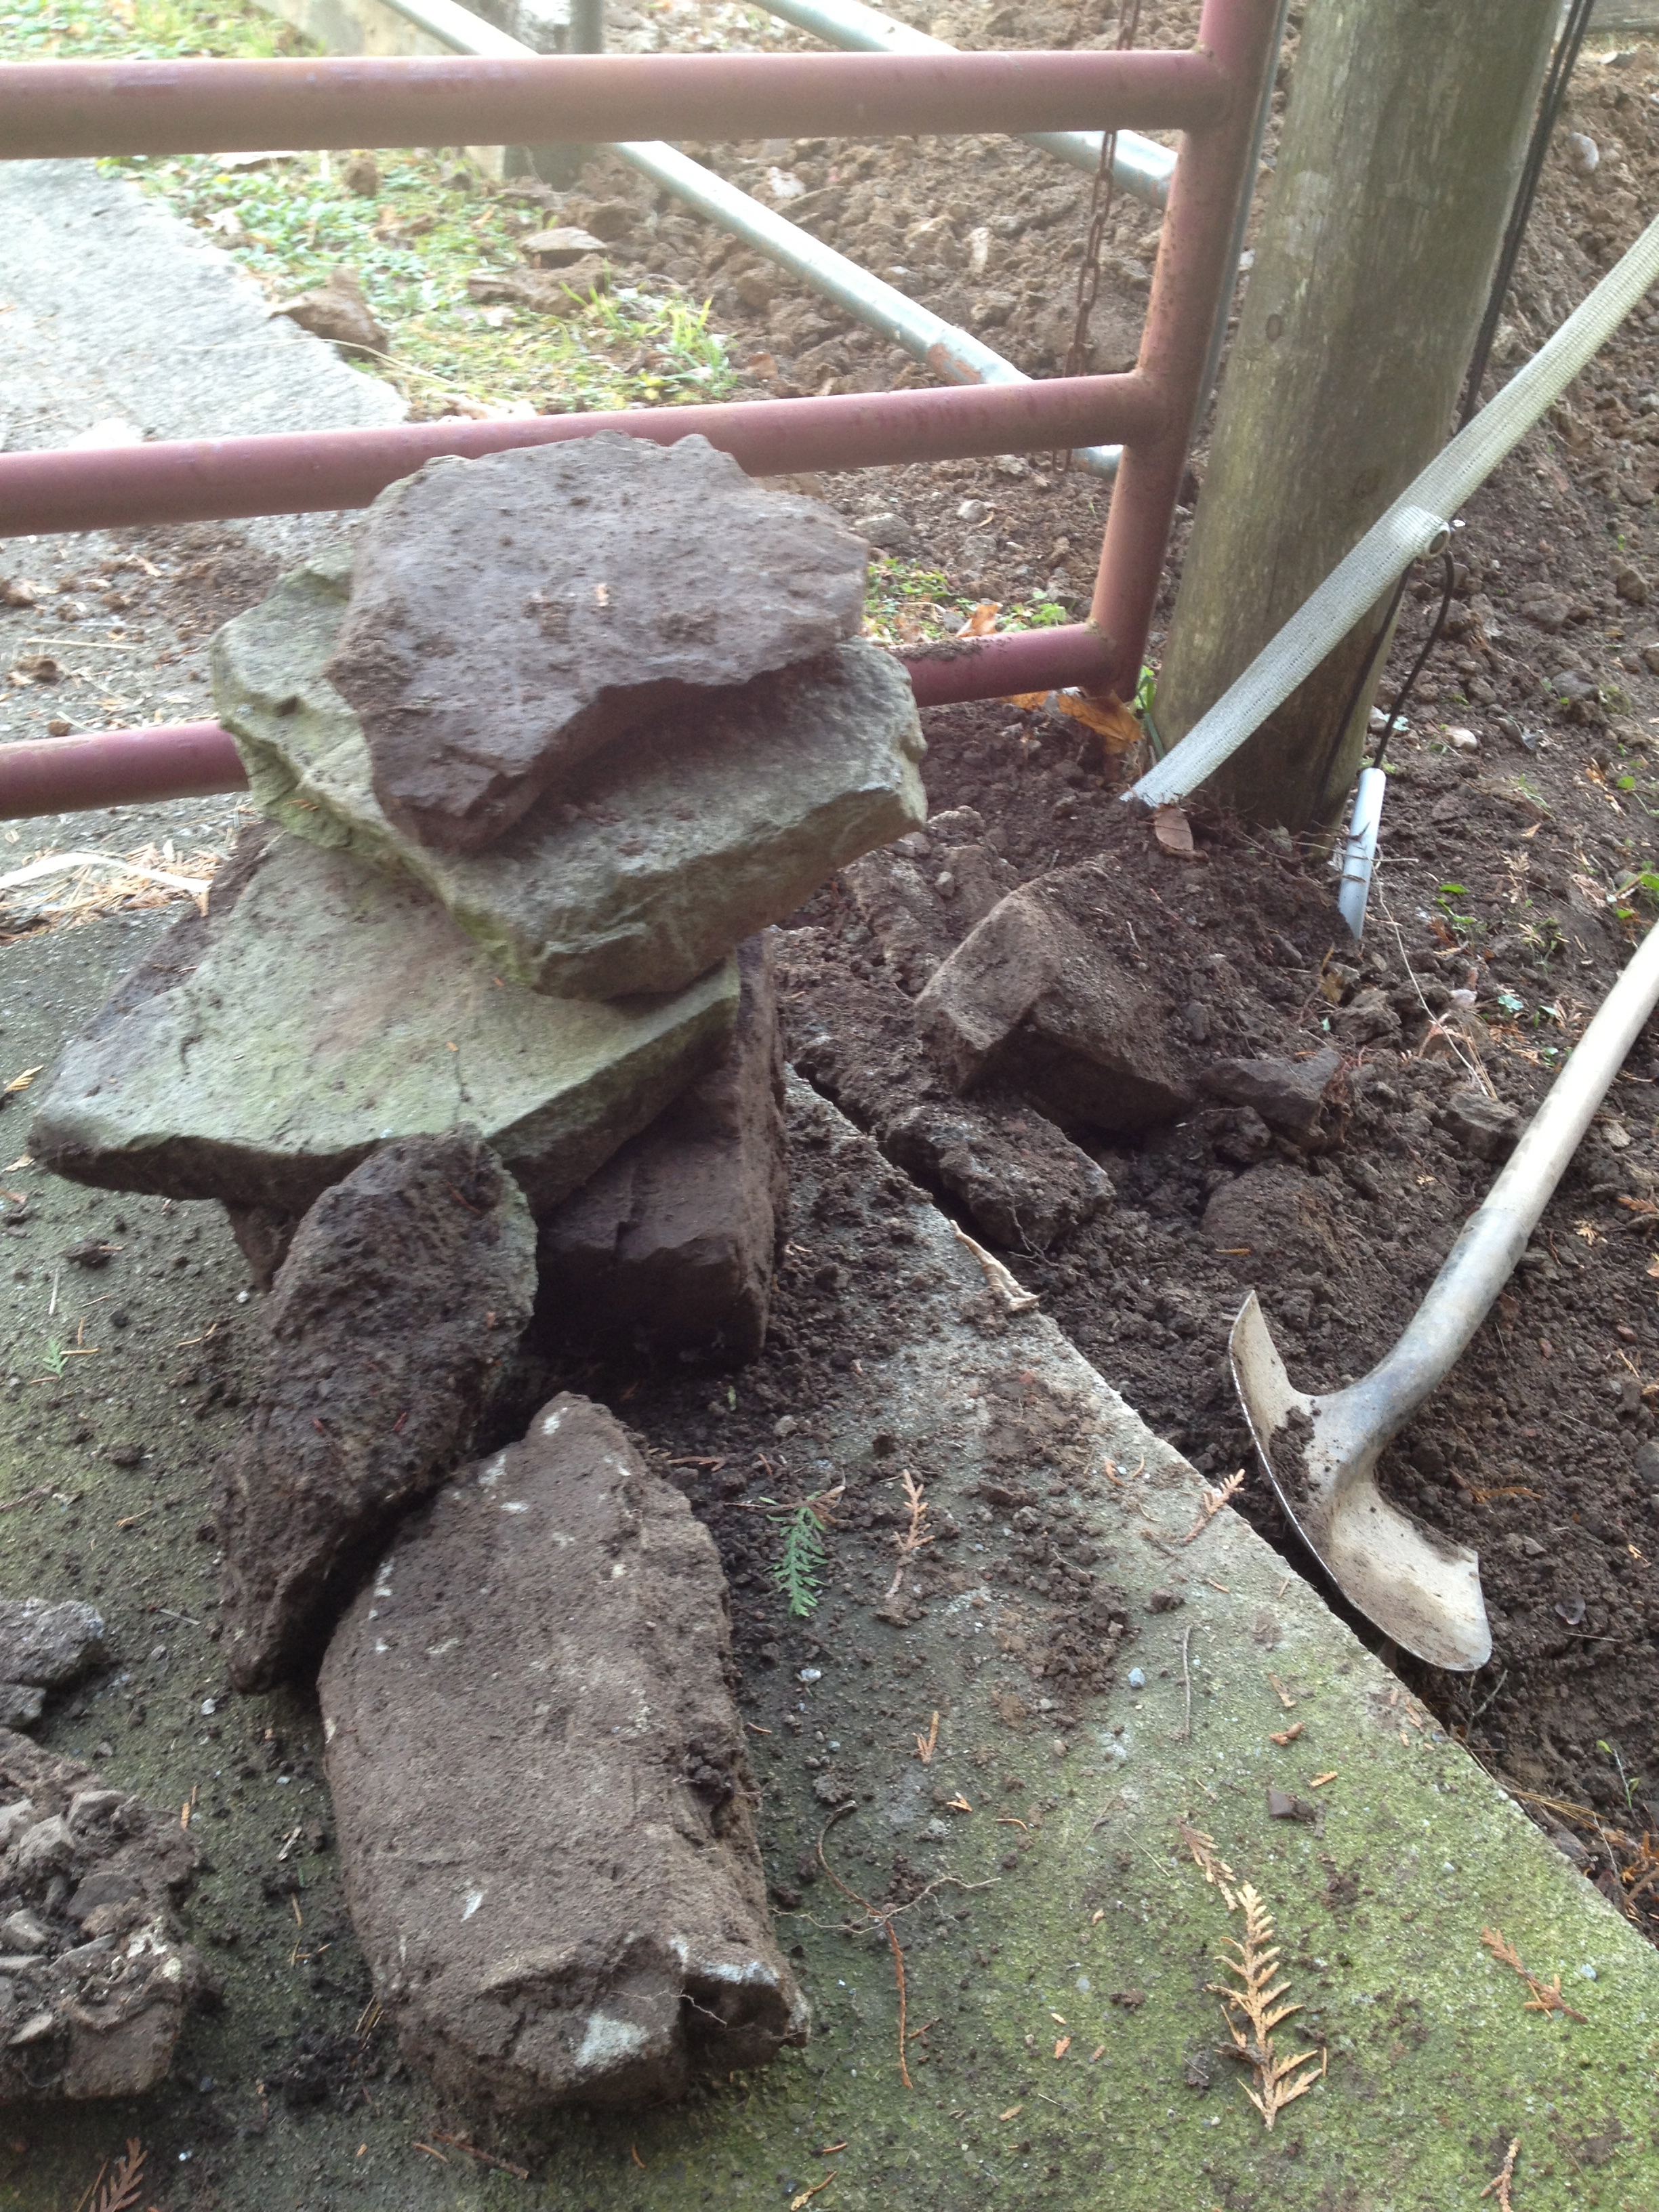 some of the rocks I unearthed while digging trench for electrical